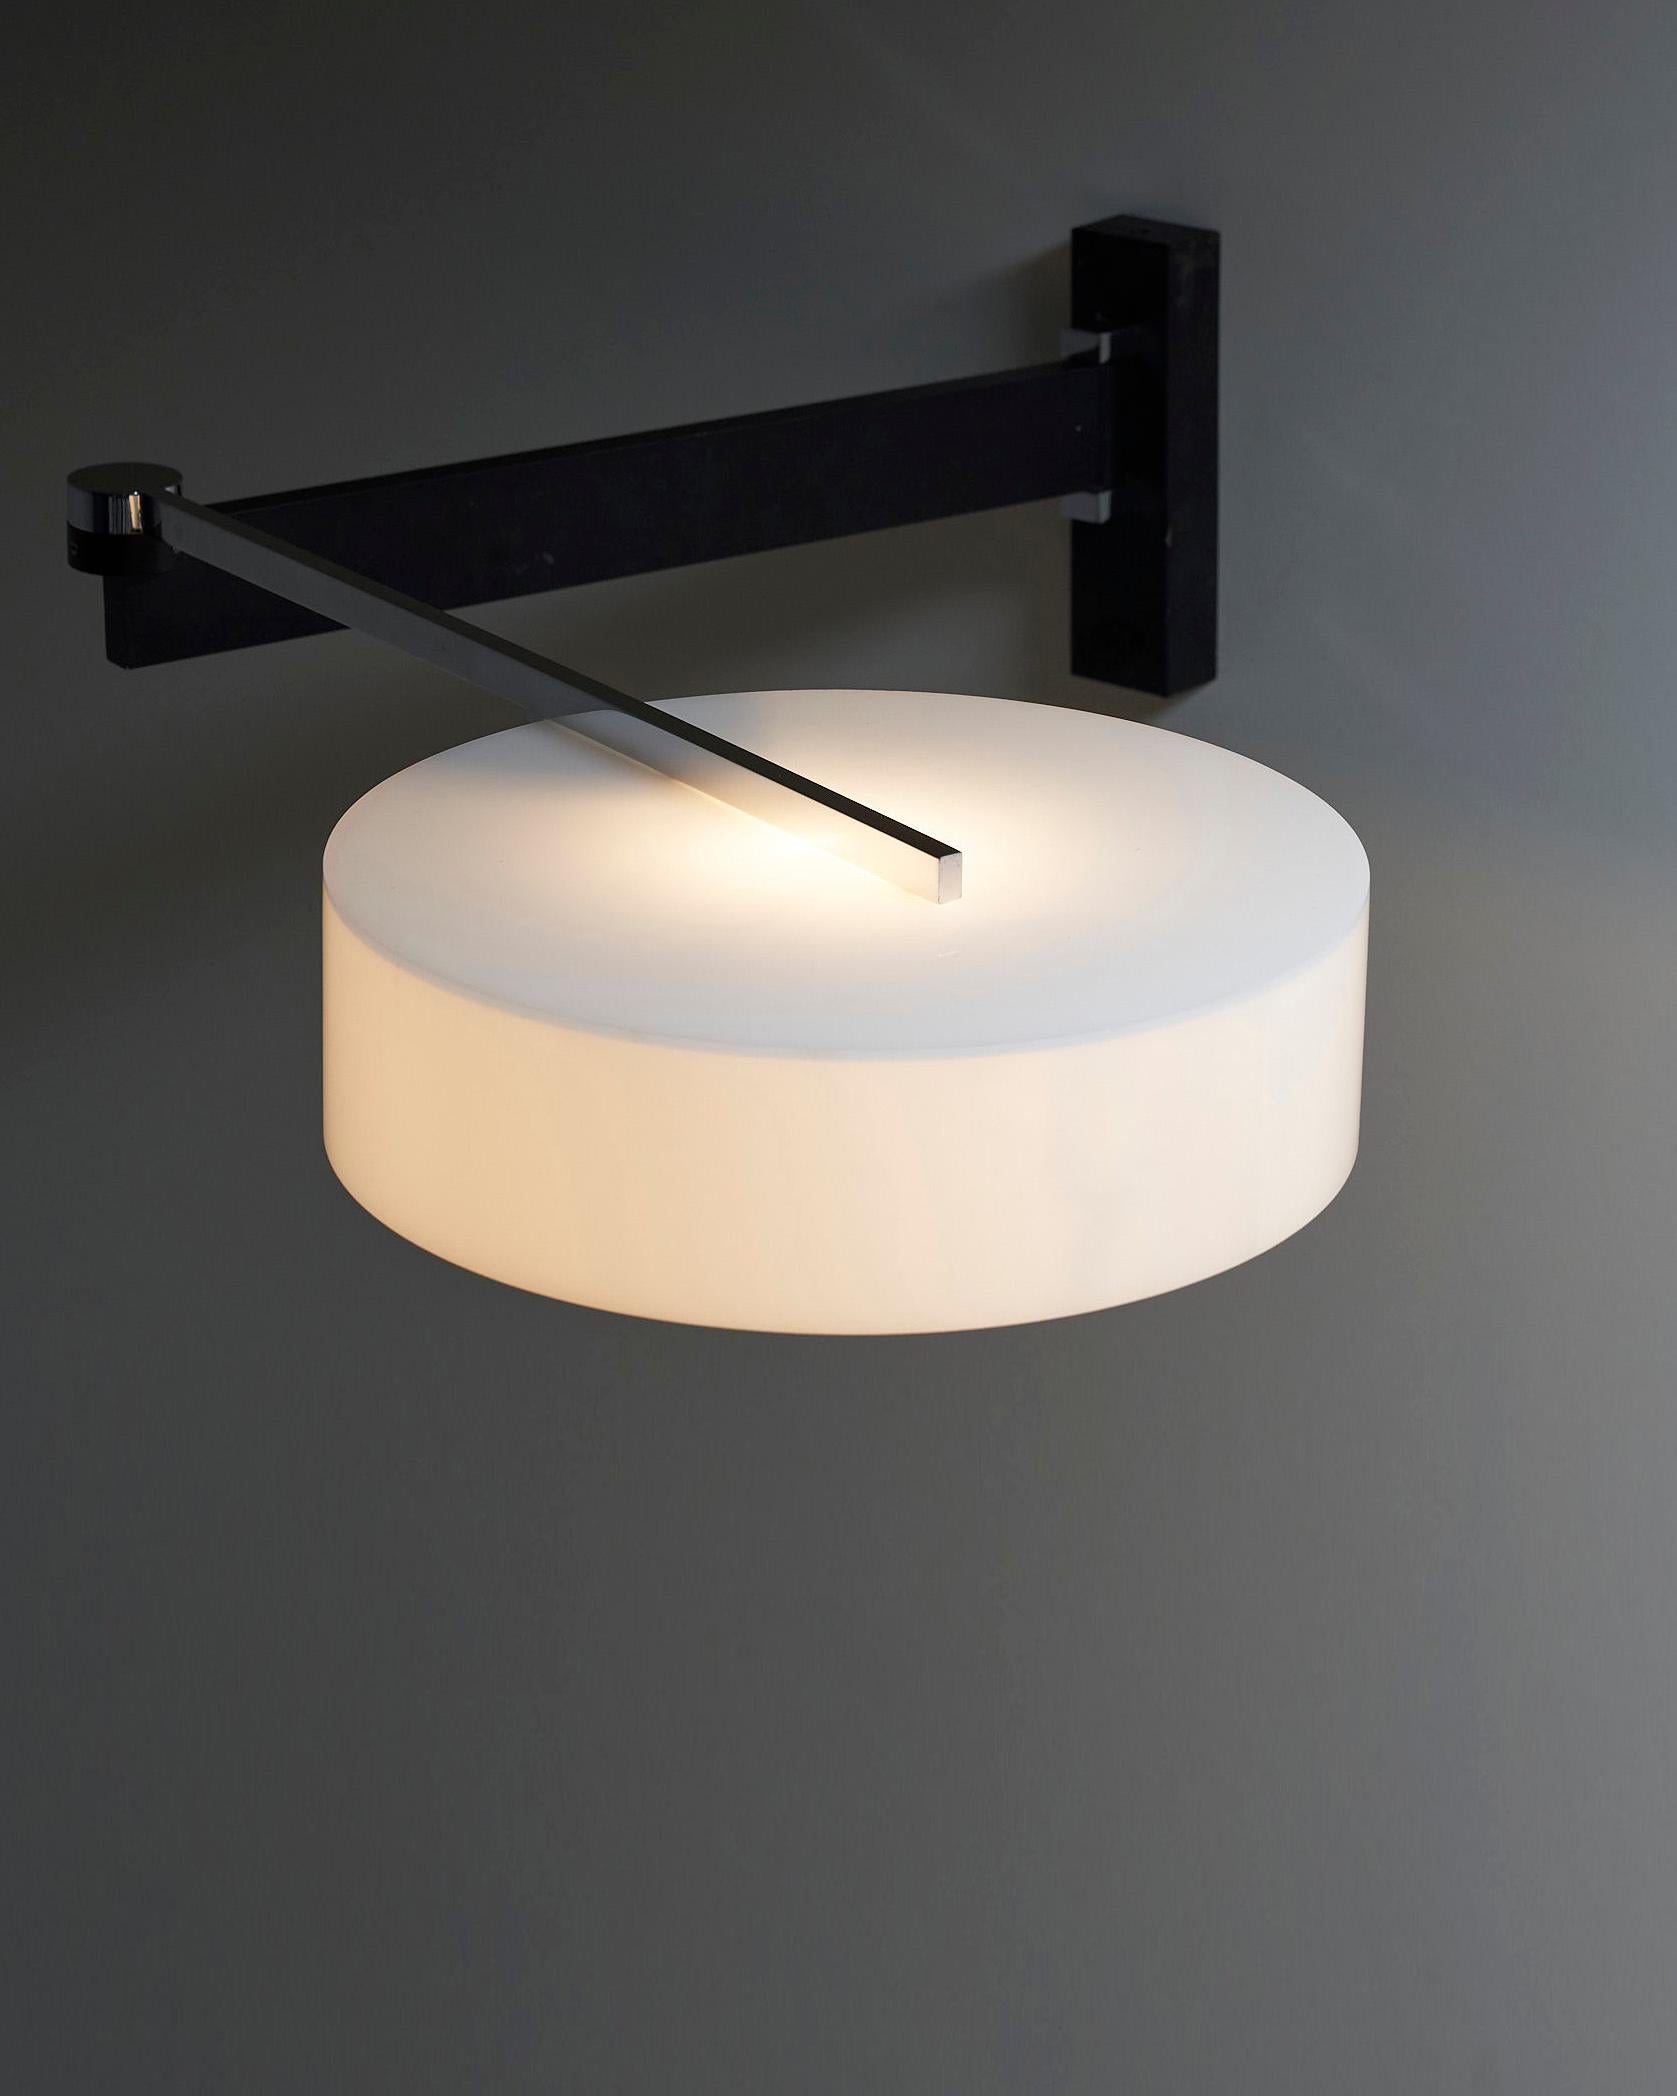 Introducing the Swivel Arm Wall Lamp by Cosack, a stunning and sleek lighting solution that combines style and functionality. This wall lamp features a sophisticated design that is sure to enhance any interior.

The lamp is designed with two